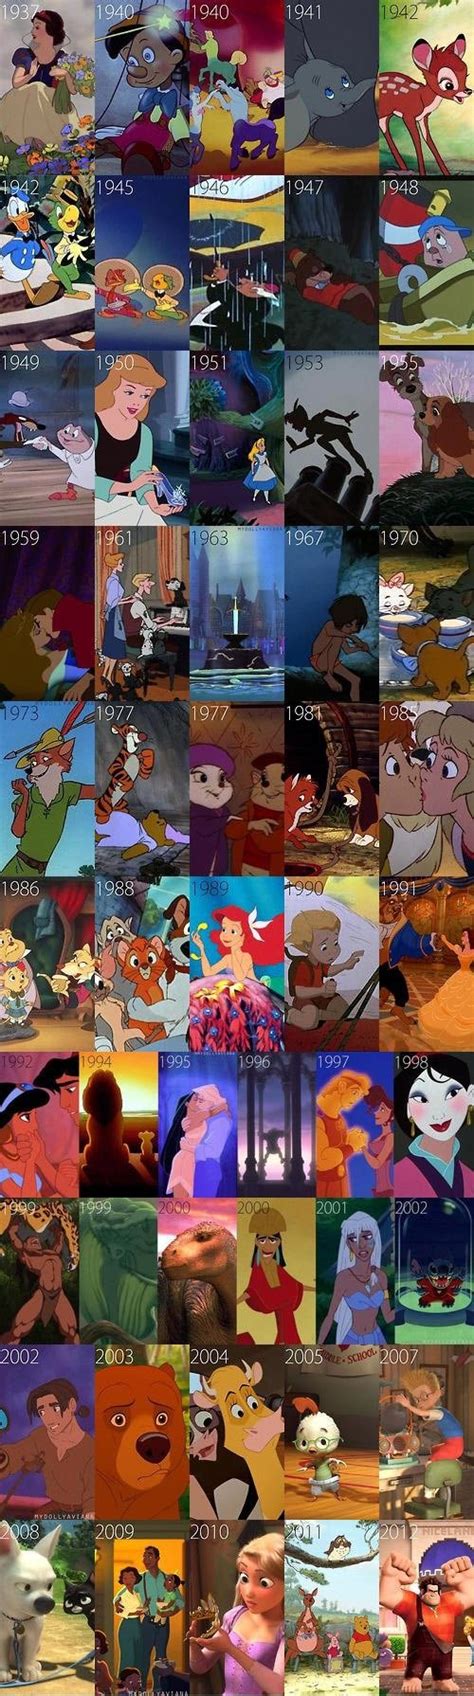 All animated disney movies ranked, from worst to best. A Summary of All Disney Animated Films (Infographic)